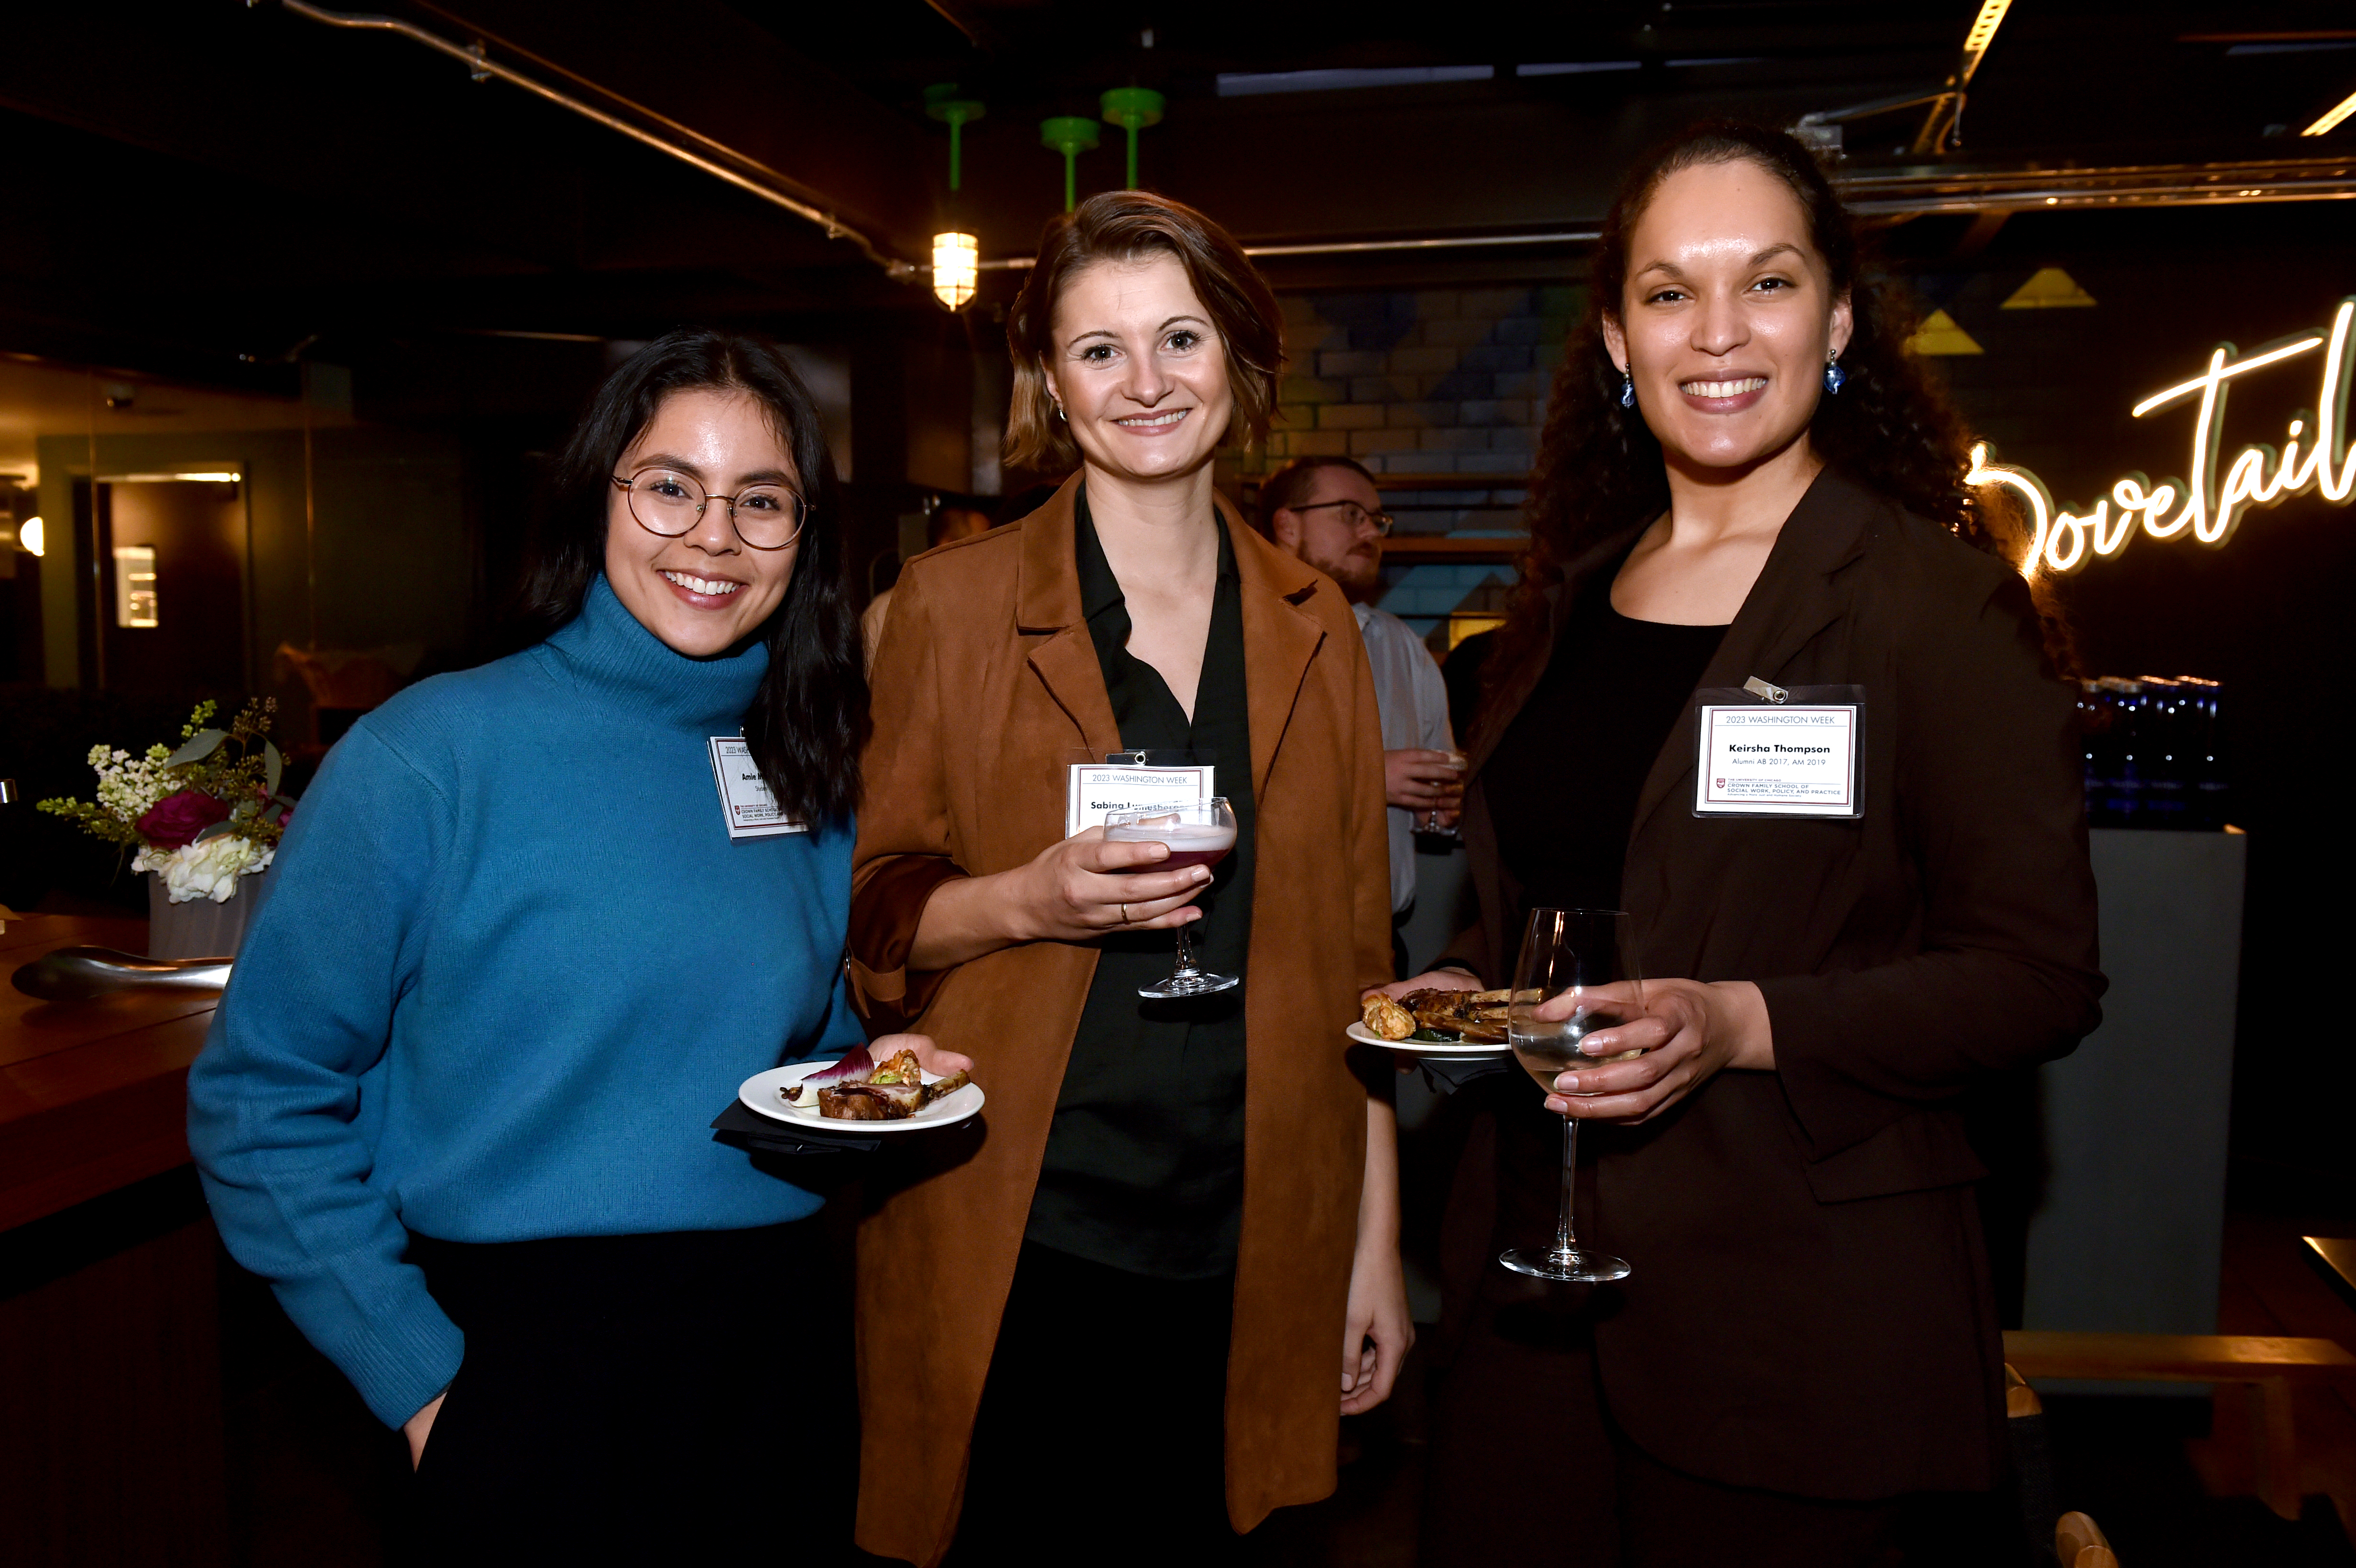 Image of three women, one in teal, one in brown and one in maroon eating appetizers